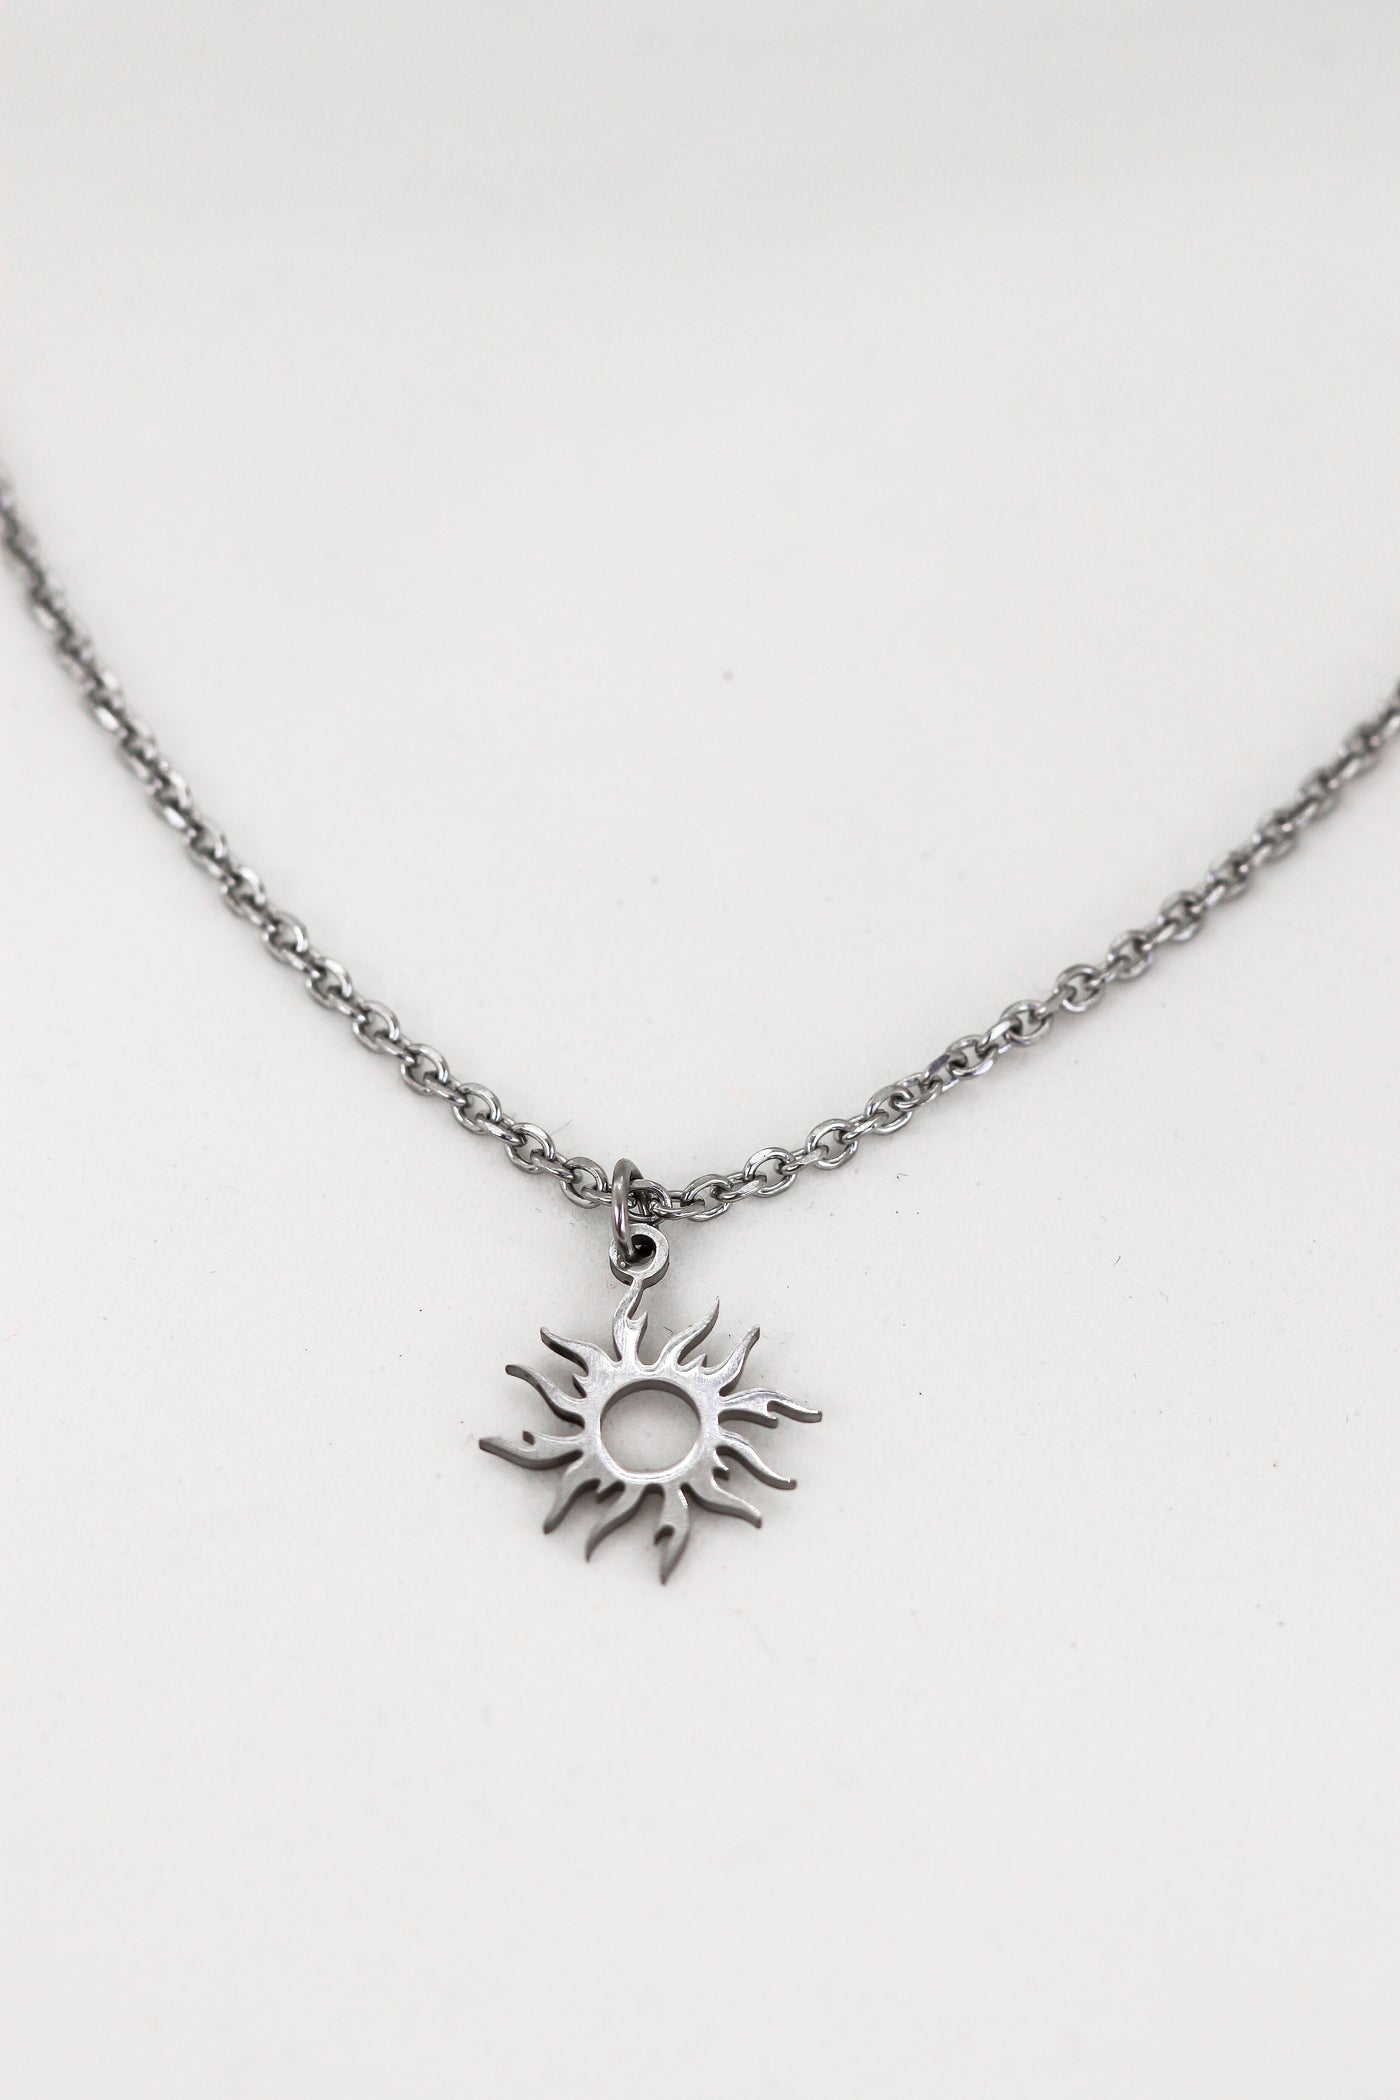 Silver sun necklace for women, stainless steel chain necklace, valenti –  Shani & Adi Jewelry